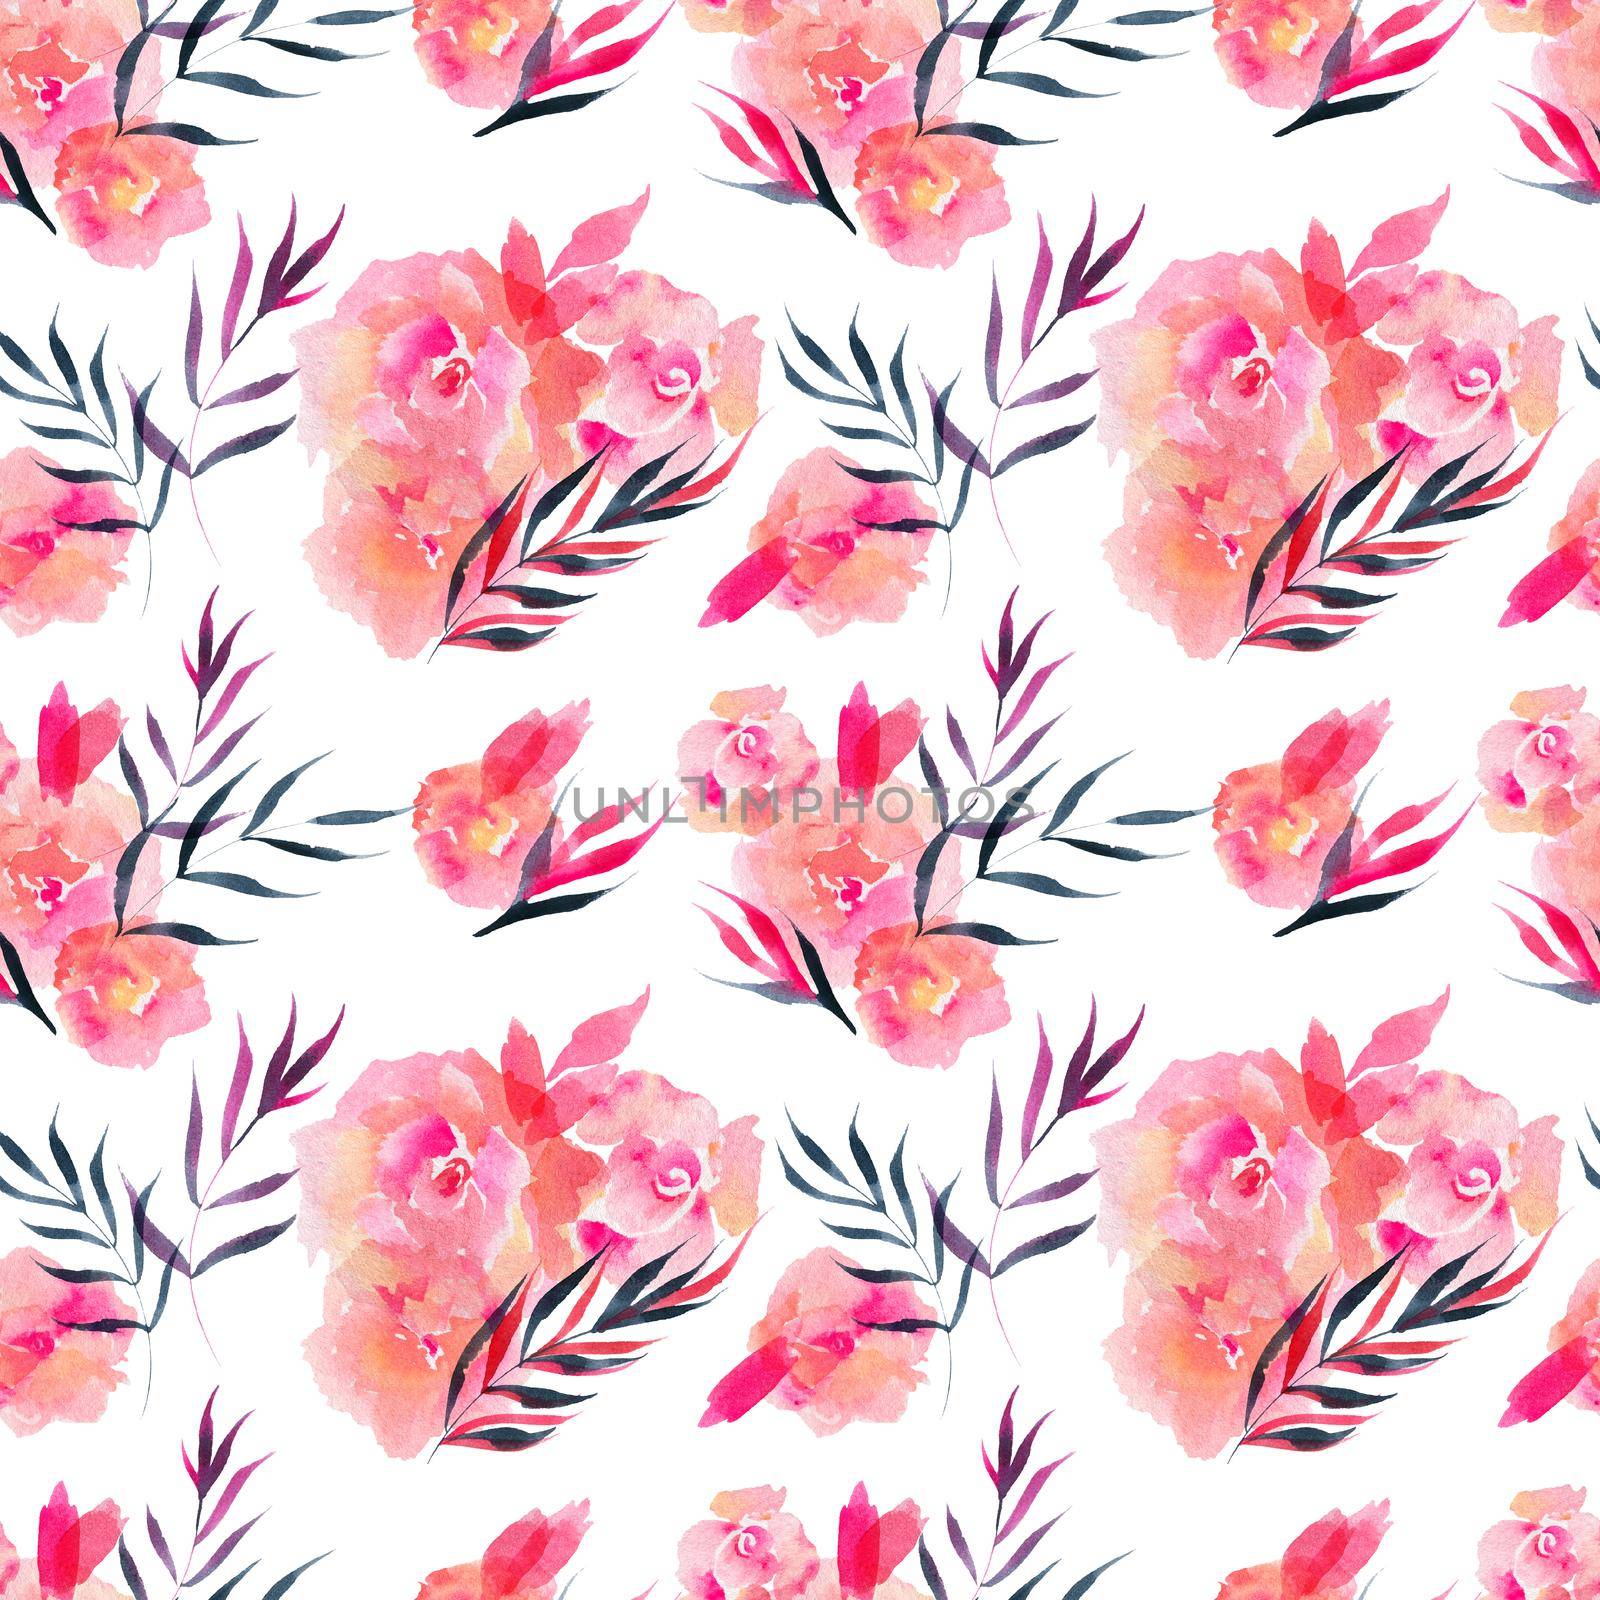 Rose bouquet seamless pattern by Xeniasnowstorm